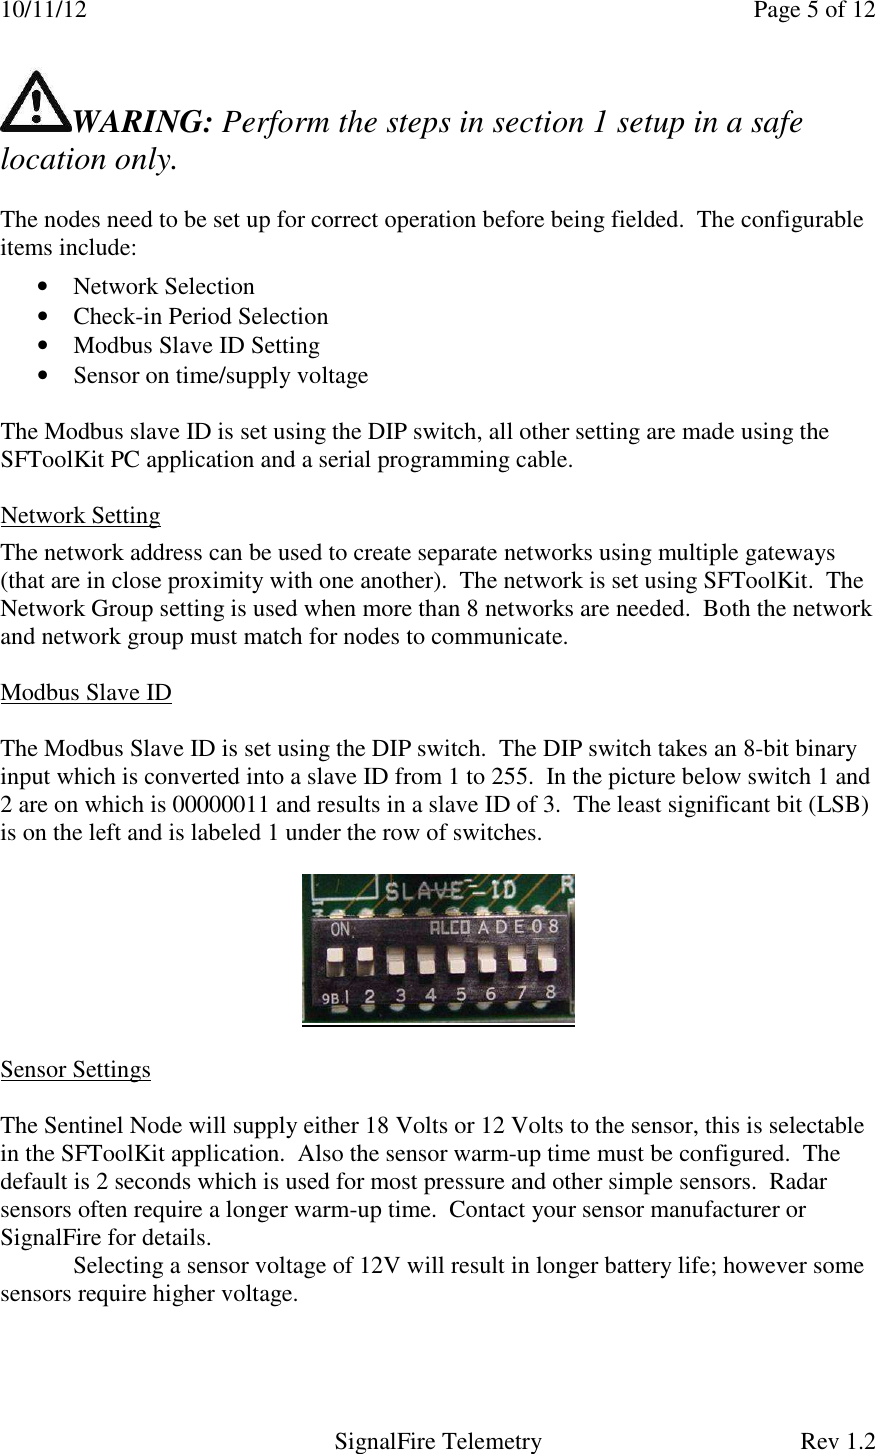 10/11/12    Page 5 of 12   SignalFire Telemetry  Rev 1.2 WARING: Perform the steps in section 1 setup in a safe location only.   The nodes need to be set up for correct operation before being fielded.  The configurable items include:  • Network Selection • Check-in Period Selection • Modbus Slave ID Setting • Sensor on time/supply voltage   The Modbus slave ID is set using the DIP switch, all other setting are made using the SFToolKit PC application and a serial programming cable.      Network Setting  The network address can be used to create separate networks using multiple gateways (that are in close proximity with one another).  The network is set using SFToolKit.  The Network Group setting is used when more than 8 networks are needed.  Both the network and network group must match for nodes to communicate.   Modbus Slave ID  The Modbus Slave ID is set using the DIP switch.  The DIP switch takes an 8-bit binary input which is converted into a slave ID from 1 to 255.  In the picture below switch 1 and 2 are on which is 00000011 and results in a slave ID of 3.  The least significant bit (LSB) is on the left and is labeled 1 under the row of switches.       Sensor Settings  The Sentinel Node will supply either 18 Volts or 12 Volts to the sensor, this is selectable in the SFToolKit application.  Also the sensor warm-up time must be configured.  The default is 2 seconds which is used for most pressure and other simple sensors.  Radar sensors often require a longer warm-up time.  Contact your sensor manufacturer or SignalFire for details.  Selecting a sensor voltage of 12V will result in longer battery life; however some sensors require higher voltage.   